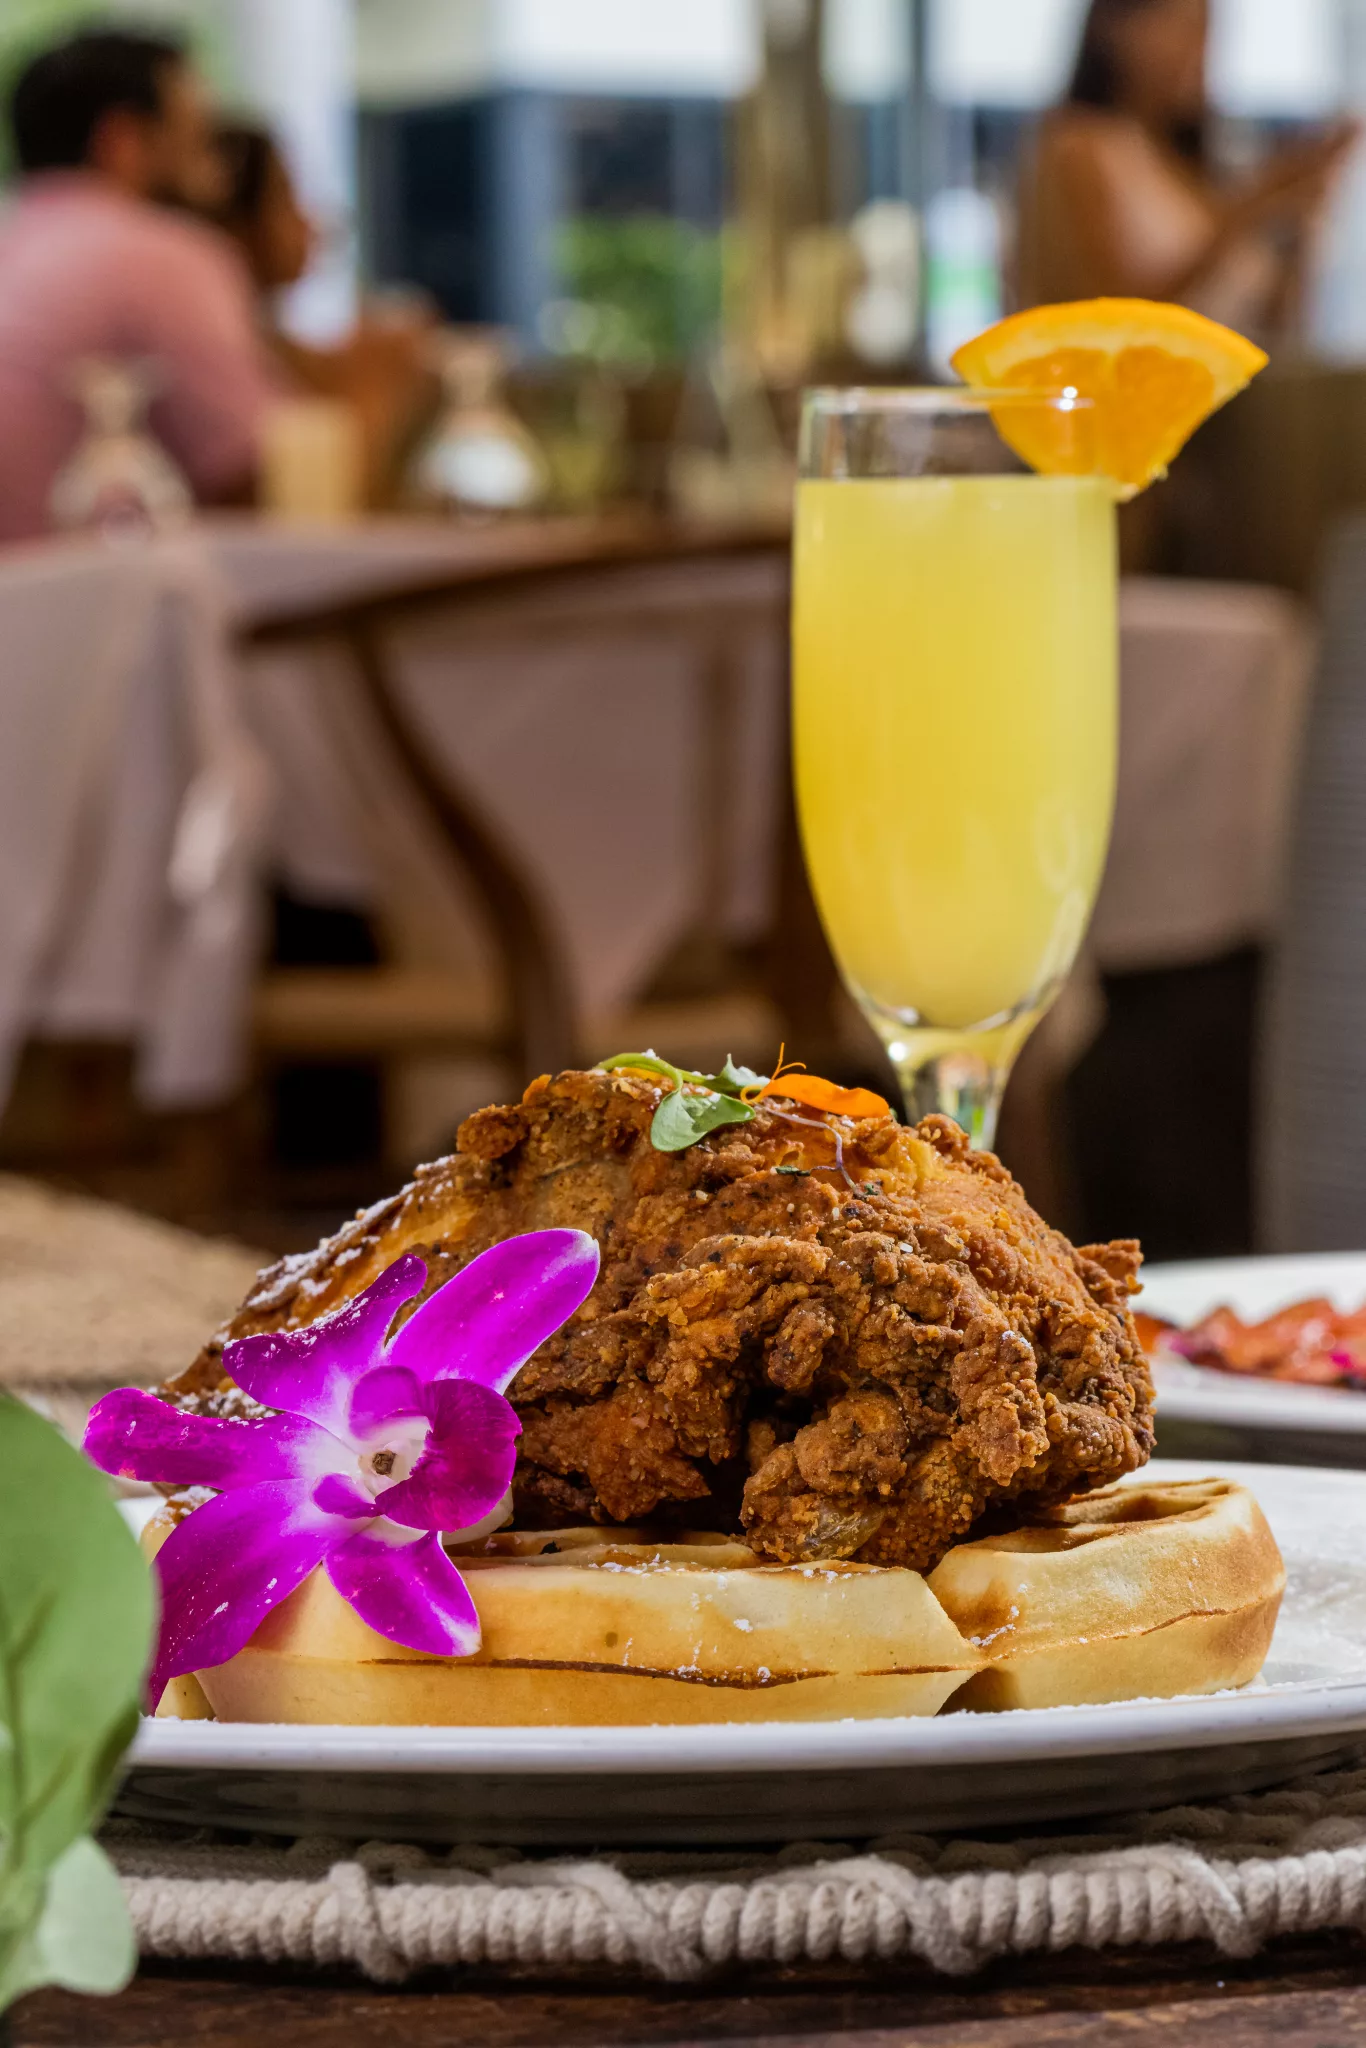 Mothers Day Brunch in Miami with friend chicken and waffles and a mimosa